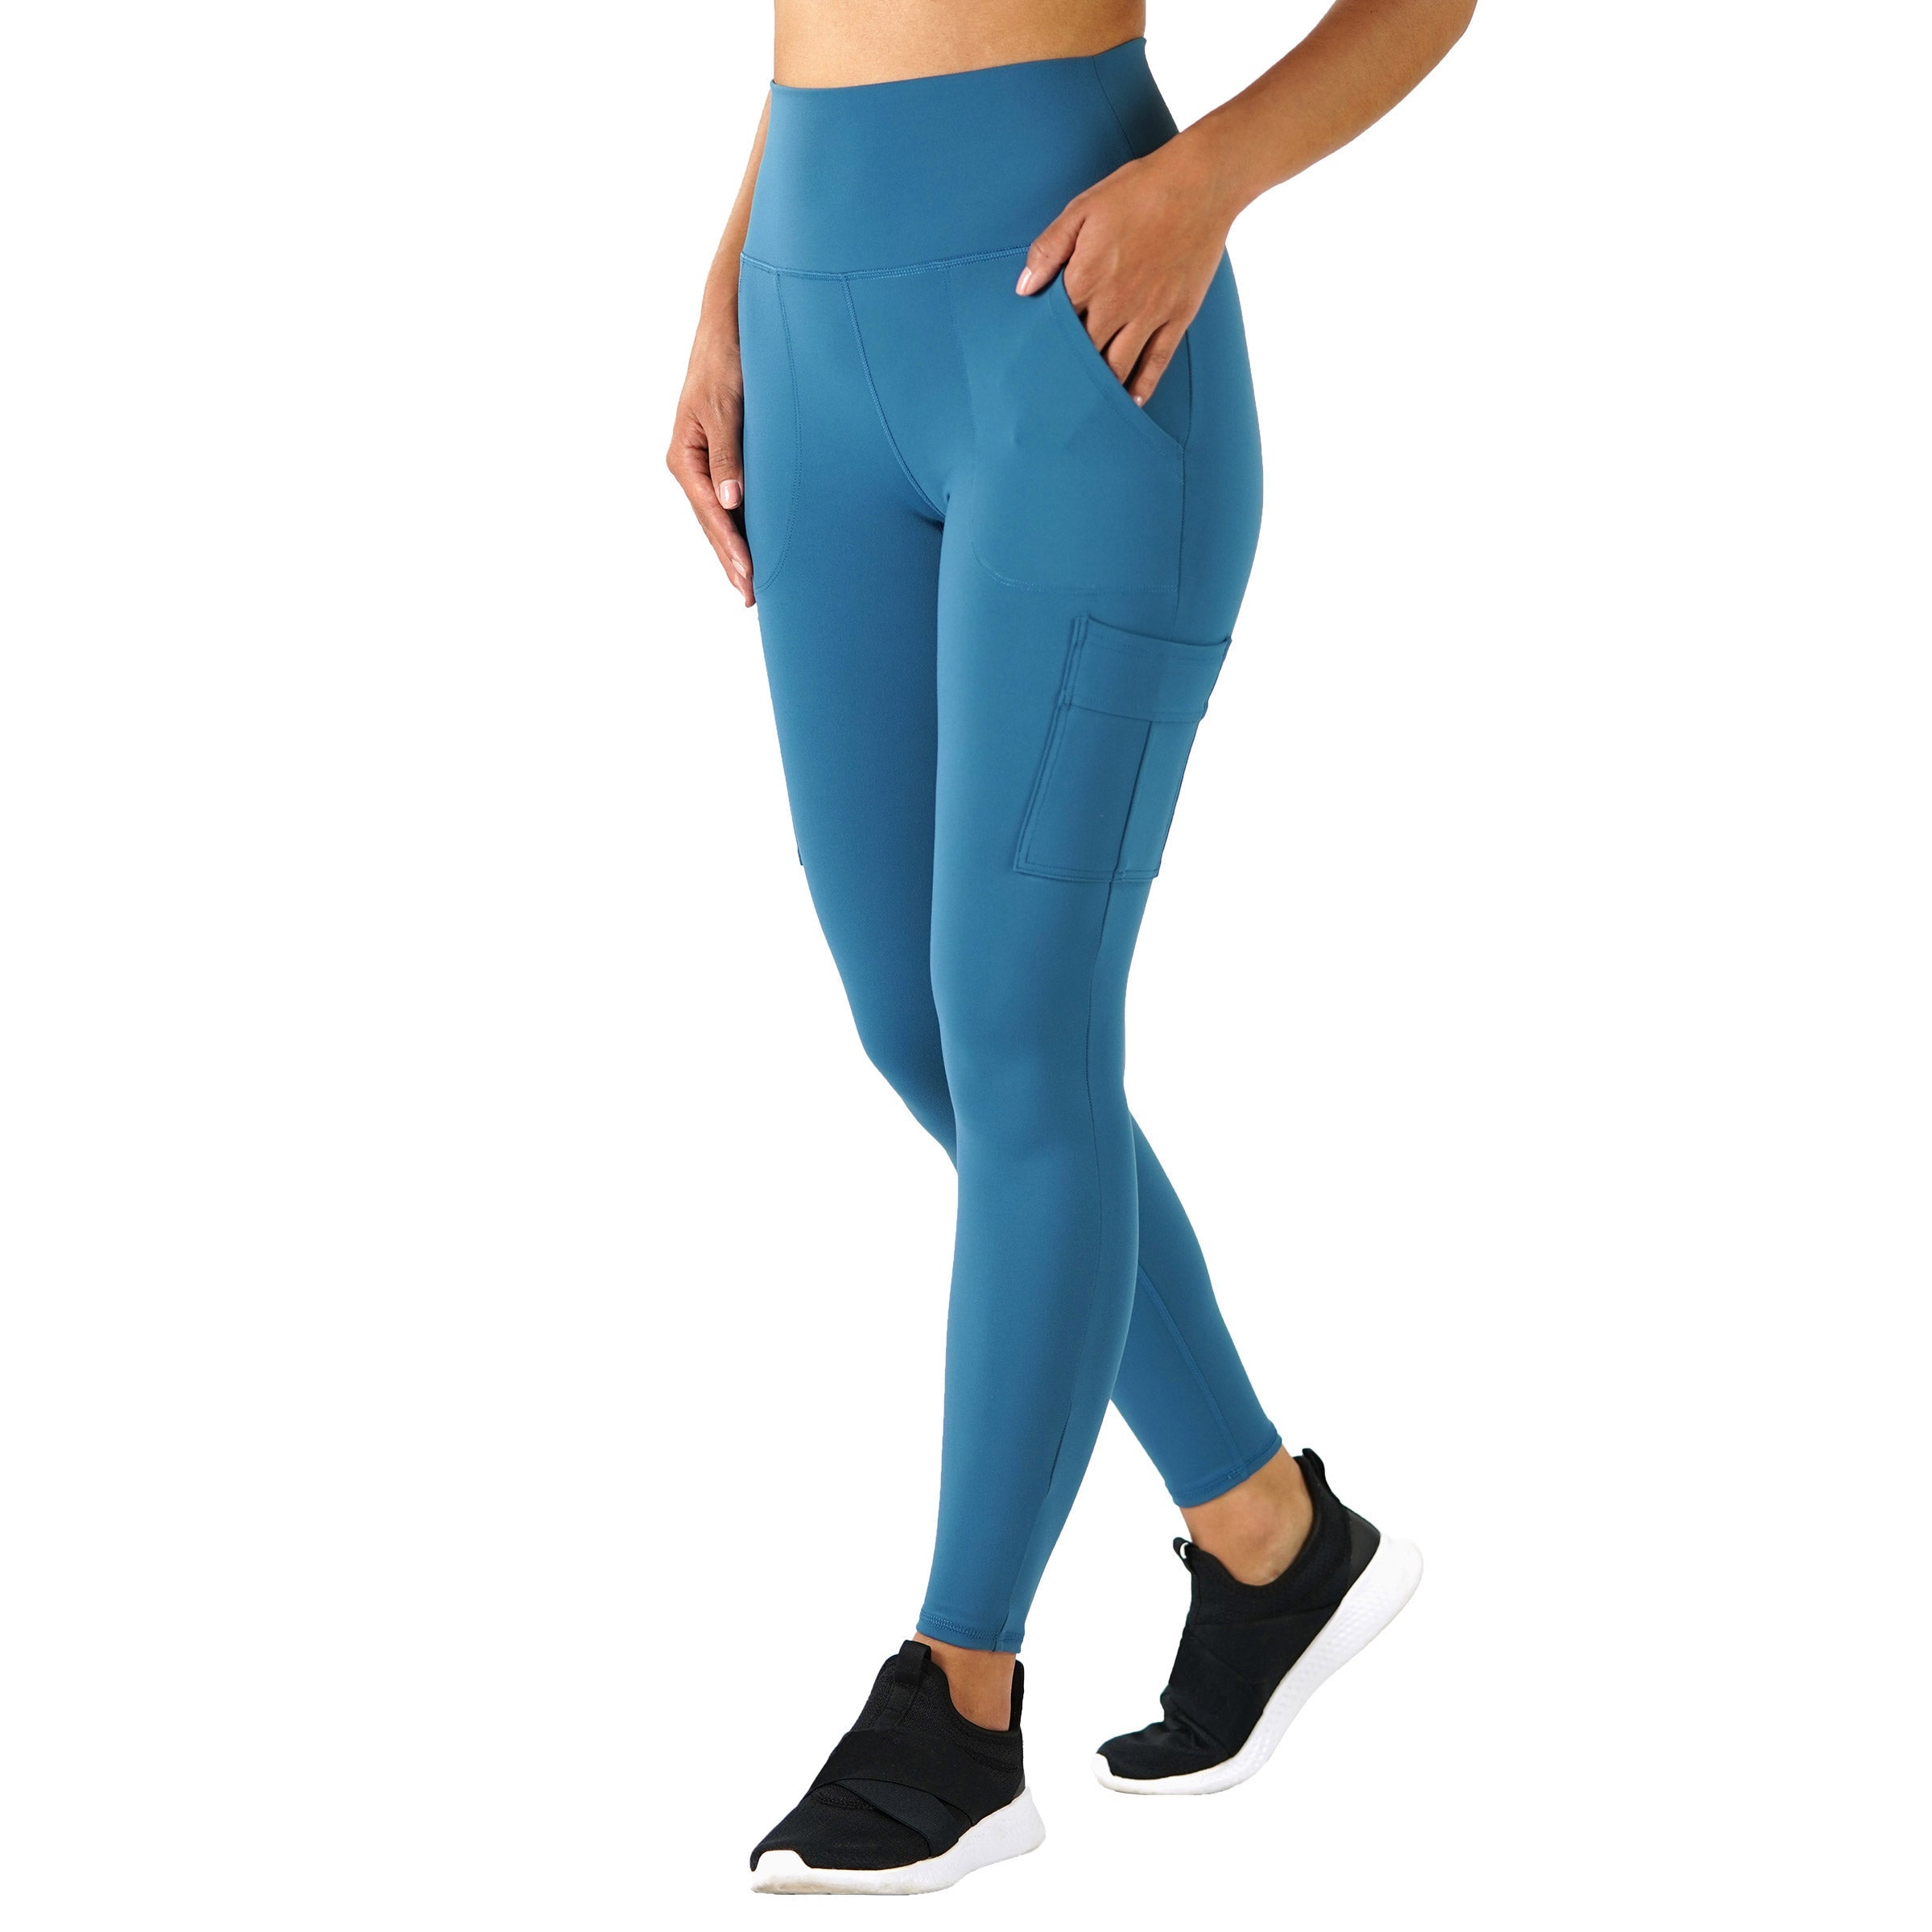 Womens Spyder Active Leggings with Side Pockets